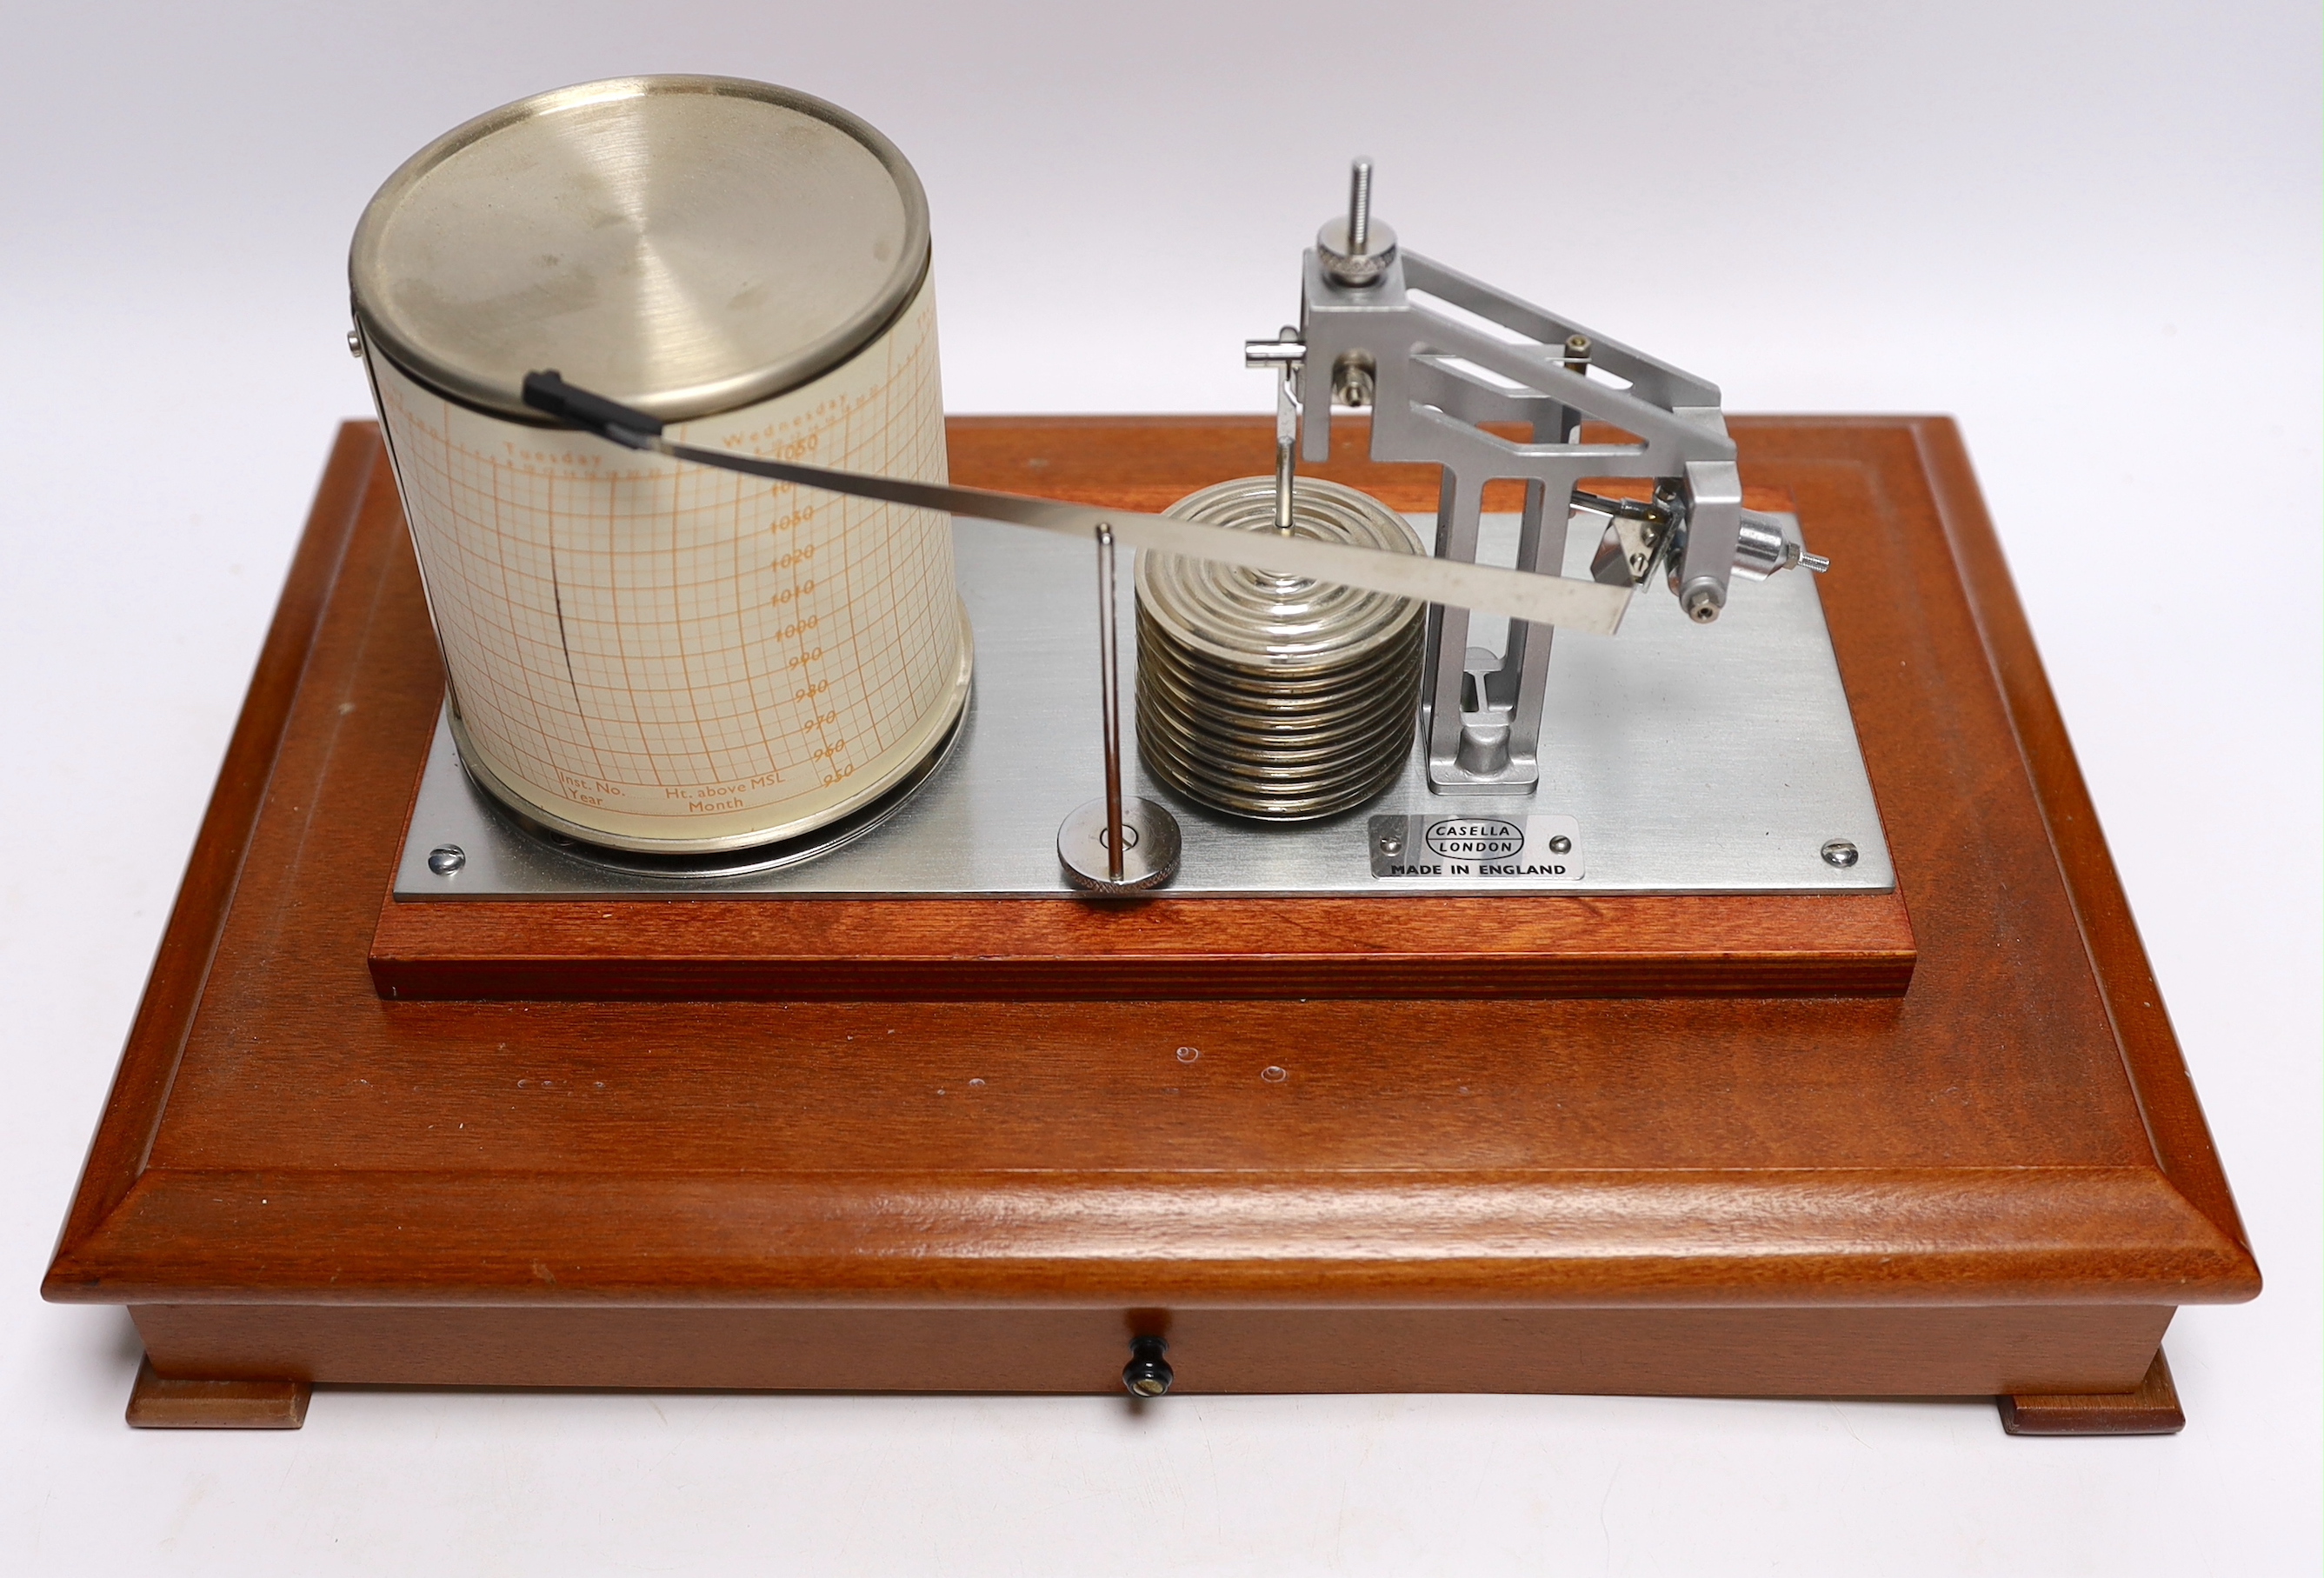 A modern 1980s barograph by Casella in a teak case with bevelled glass panels and incorporating a - Image 2 of 3